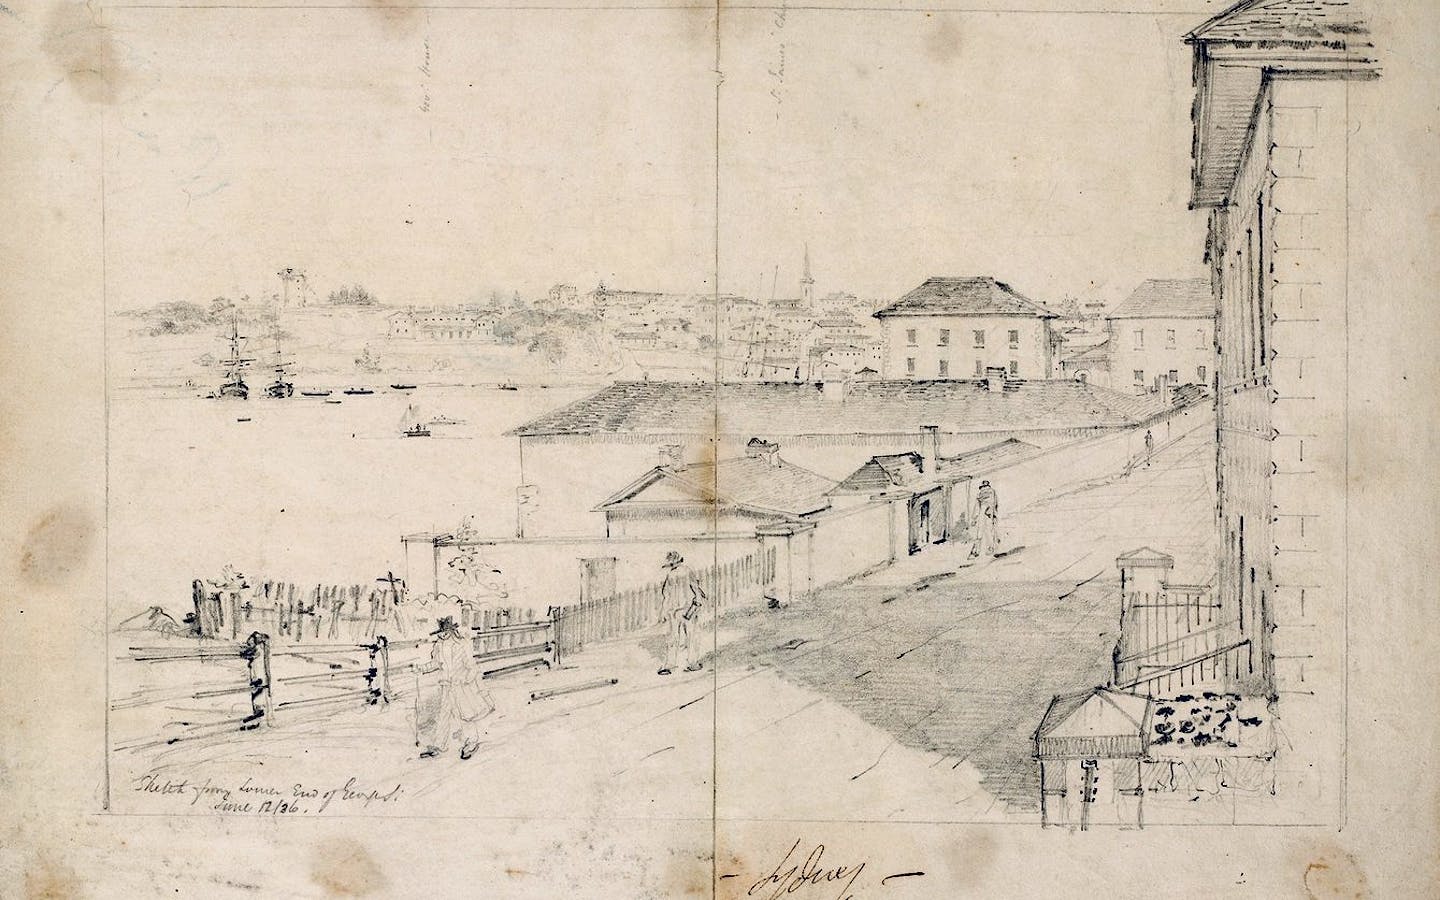 Dockyard Russell - view from lower end of George Street - 12 Jun 1836